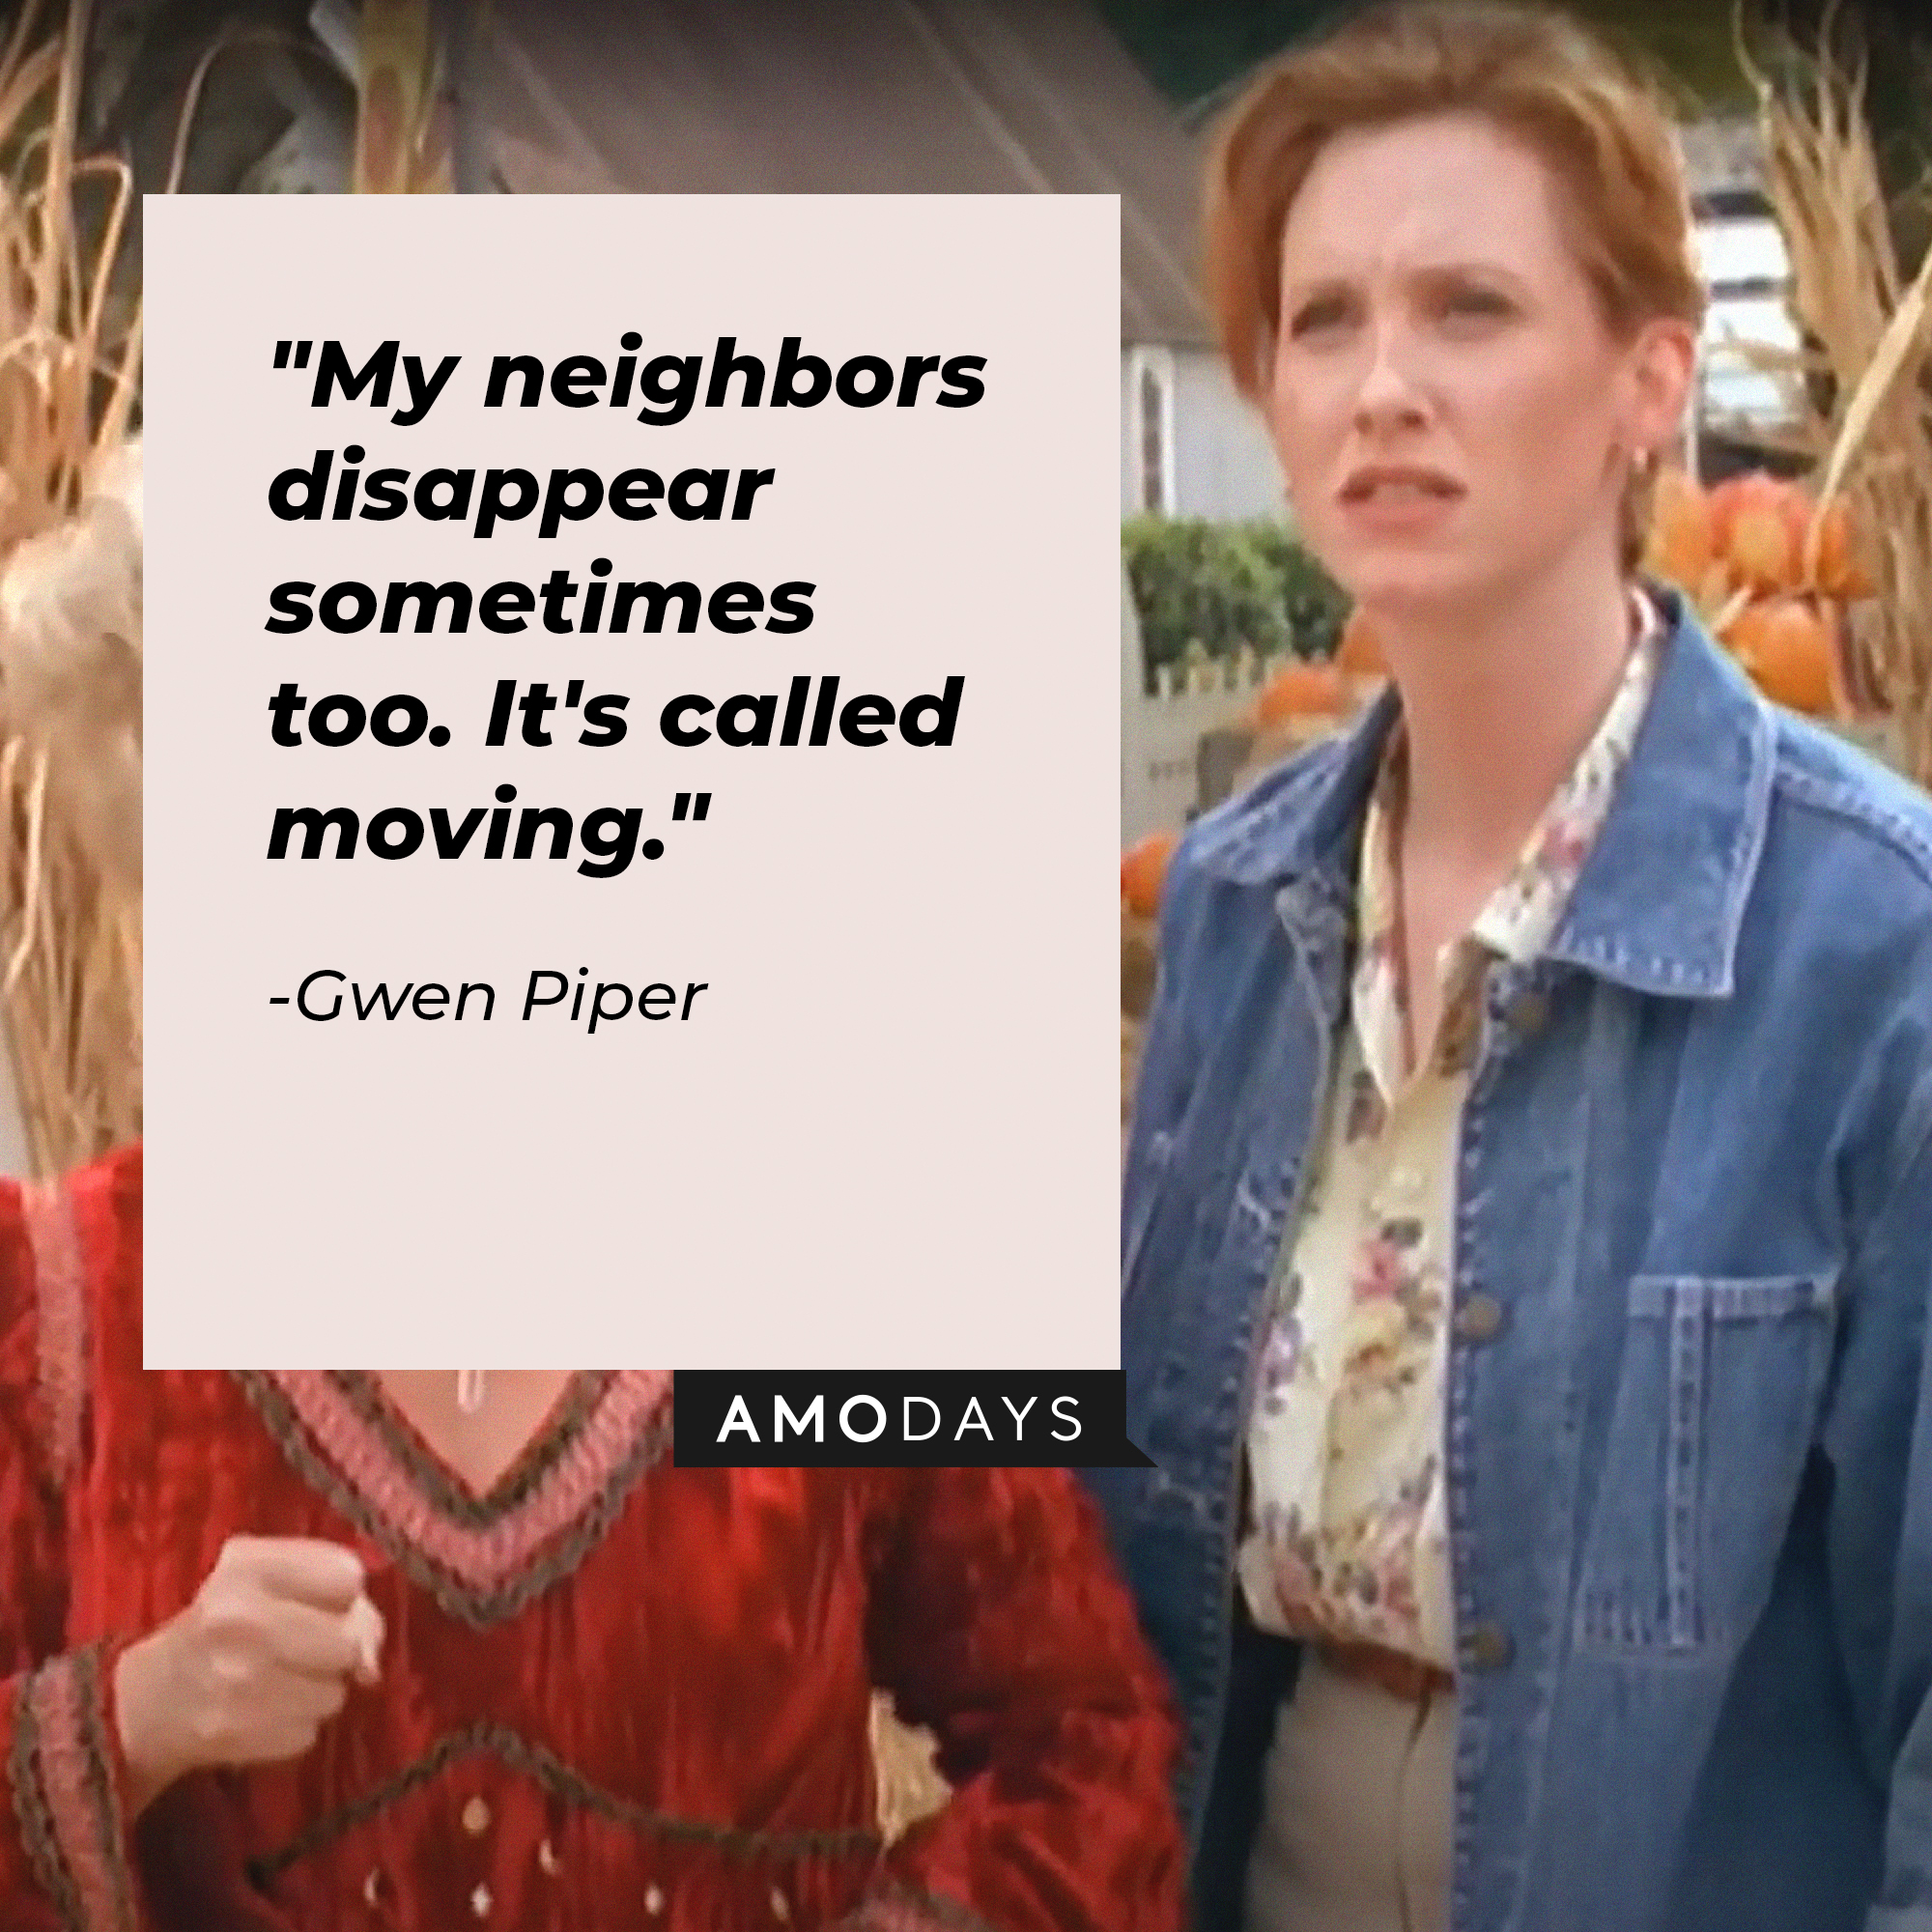 Gwen Piper's quote: "My neighbors disappear sometimes too. It's called moving." | Source: Youtube.com/disneychannel